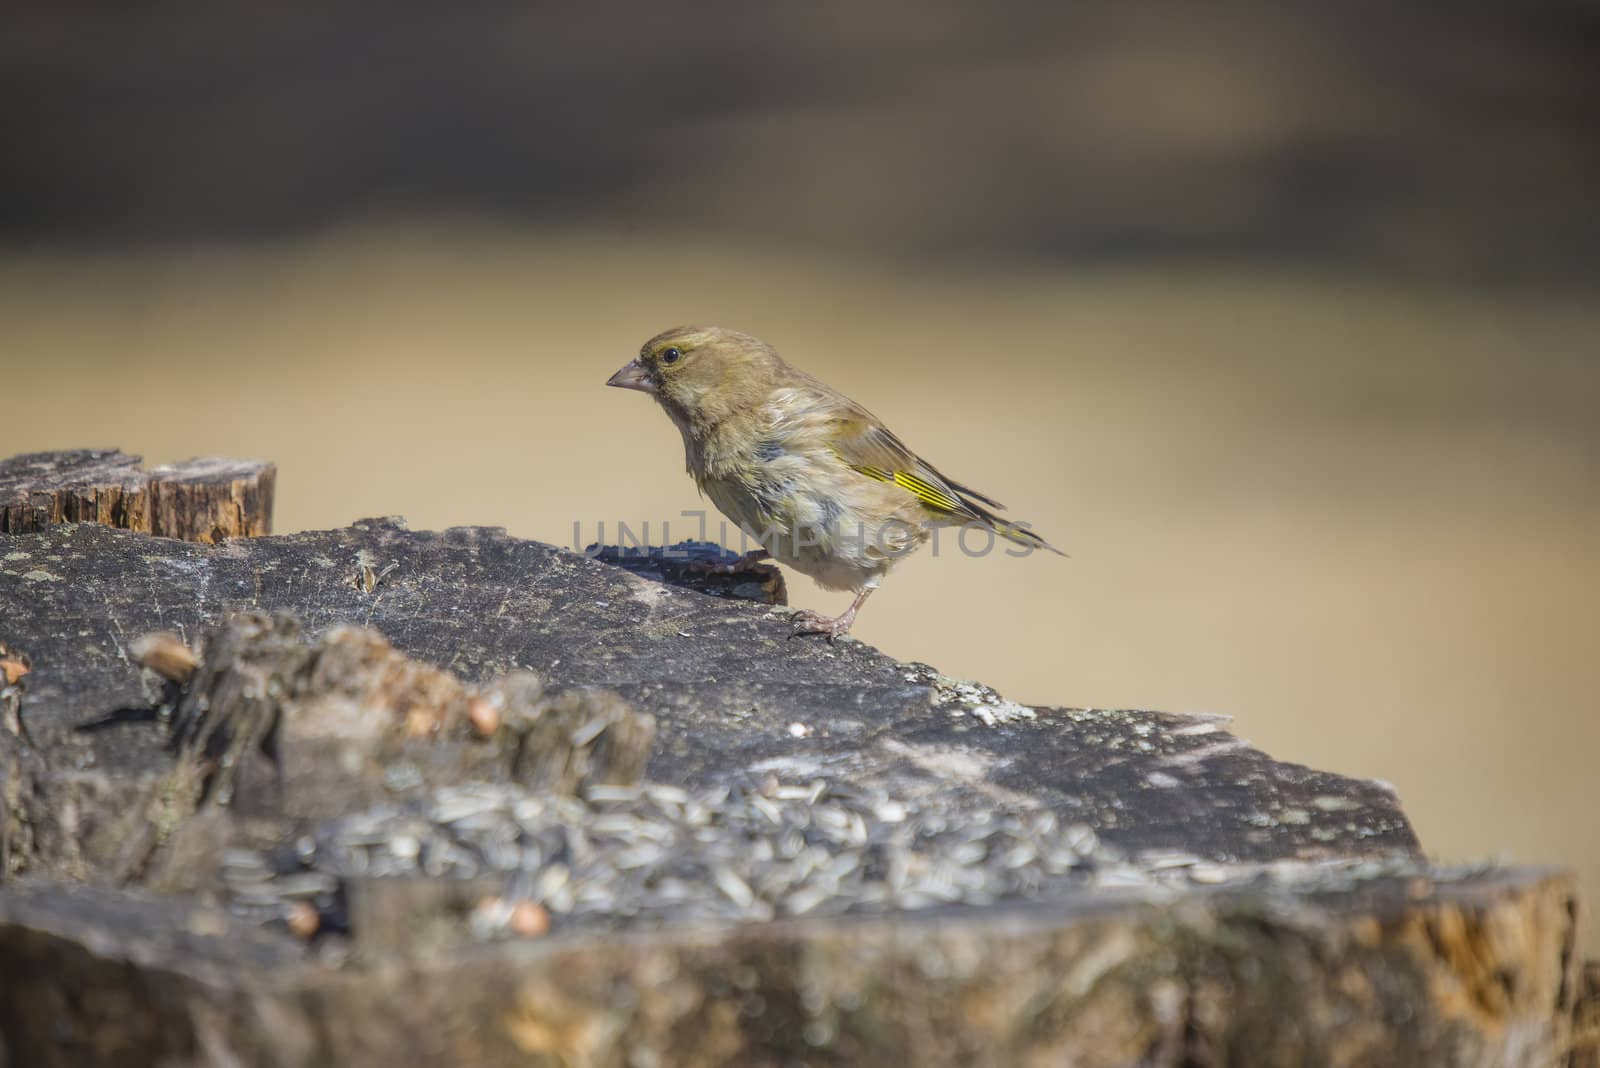 The picture of Greenfinch is shot by a tree stump in the forest at Fredriksten fortress in Halden, Norway a day in April 2013.